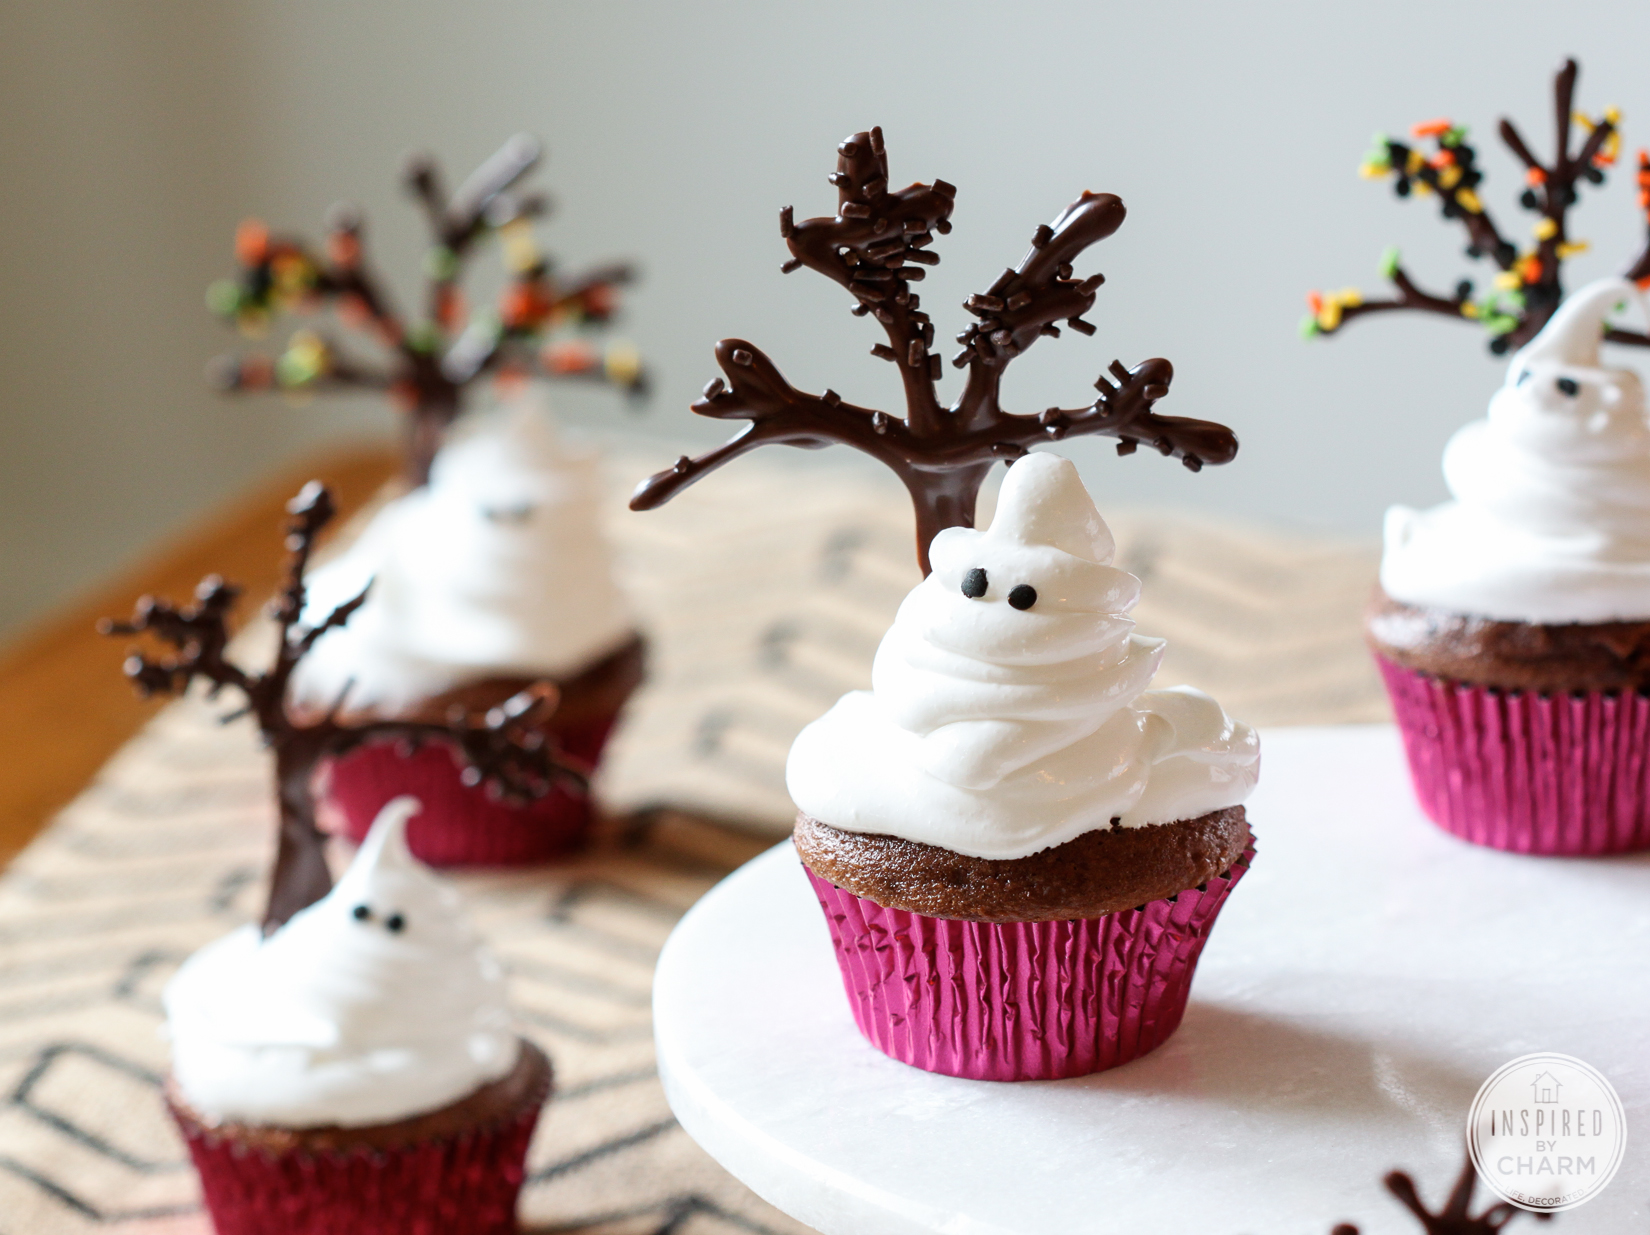 Ghost Cupcakes | Inspired by Charm